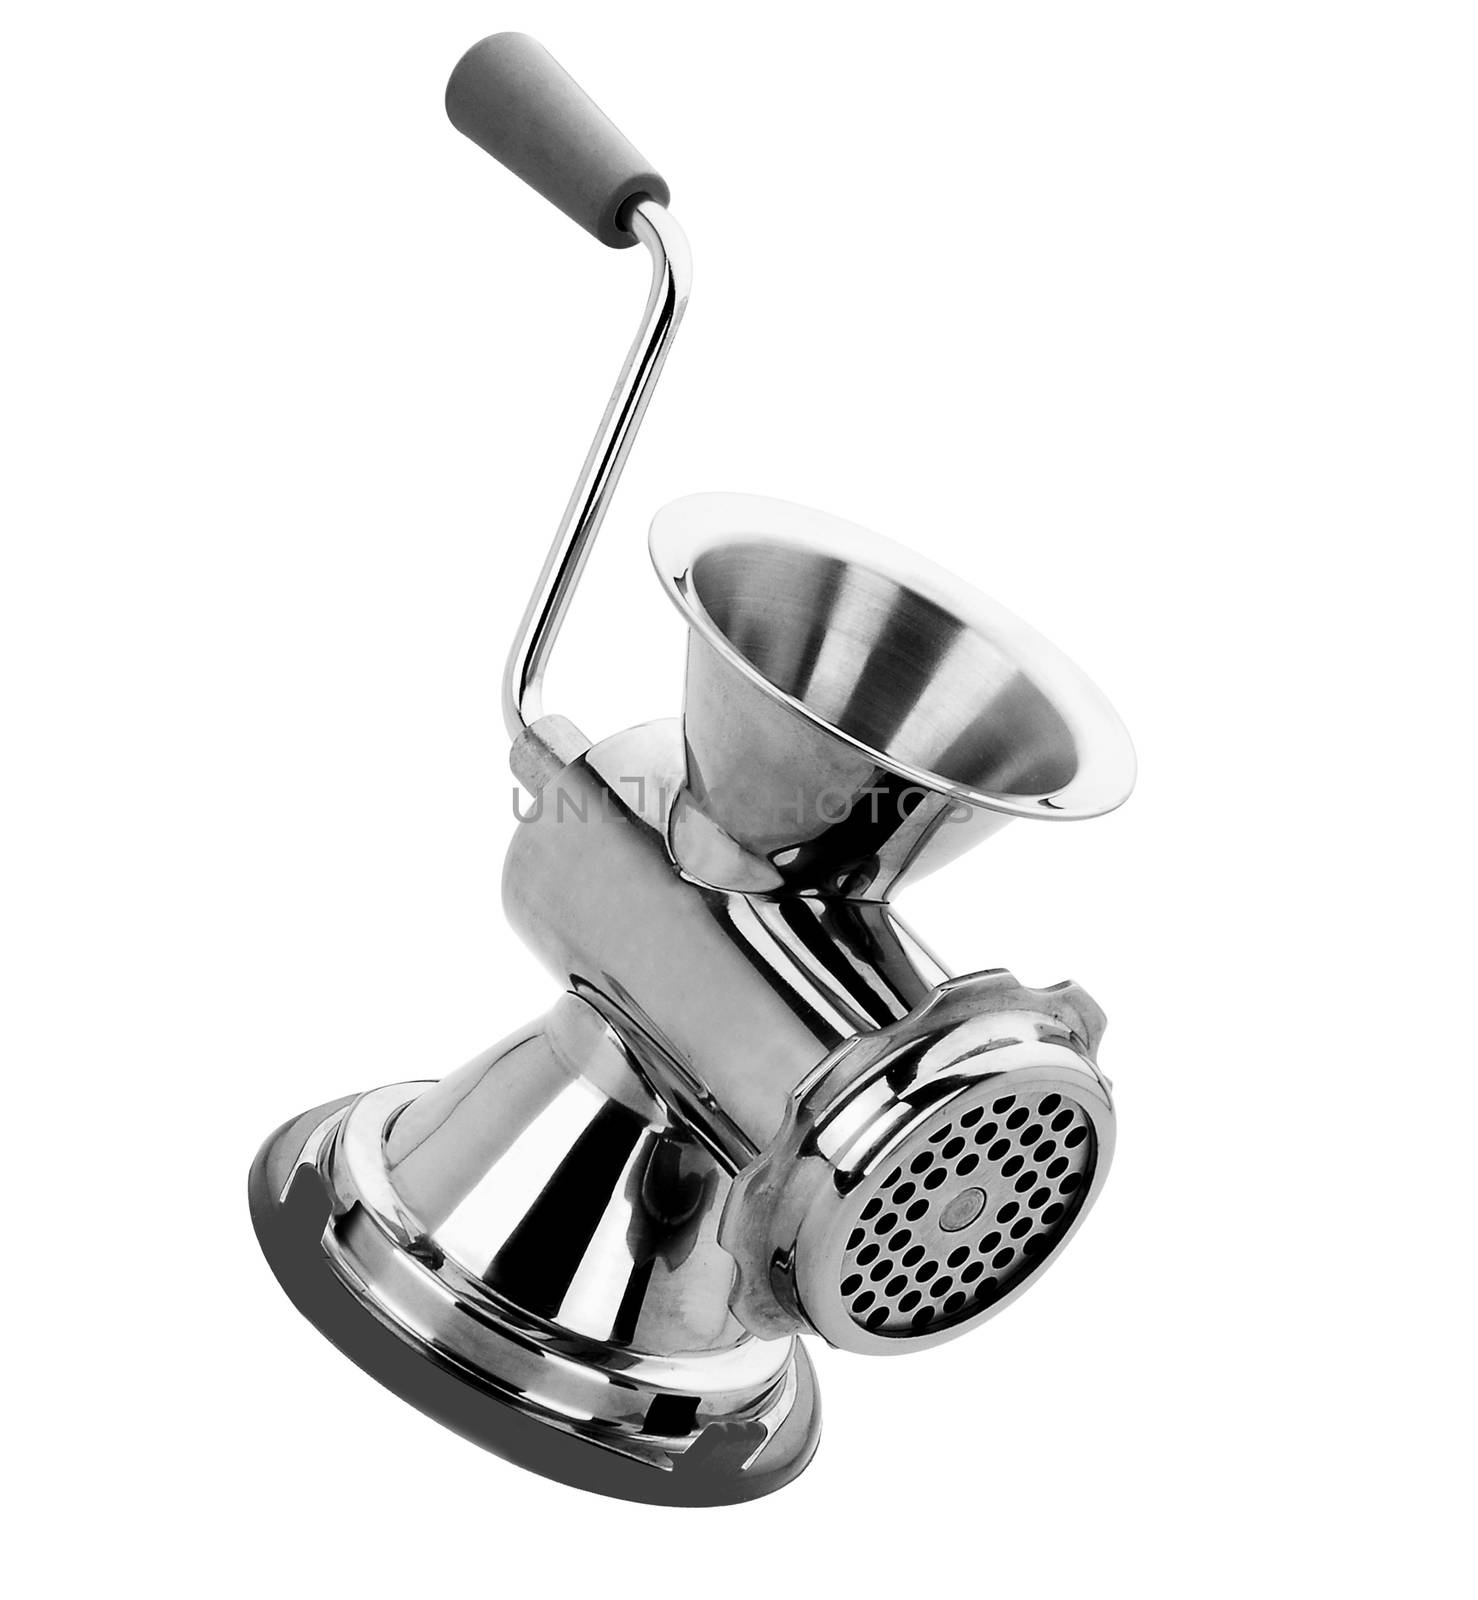 meat grinder on a white background